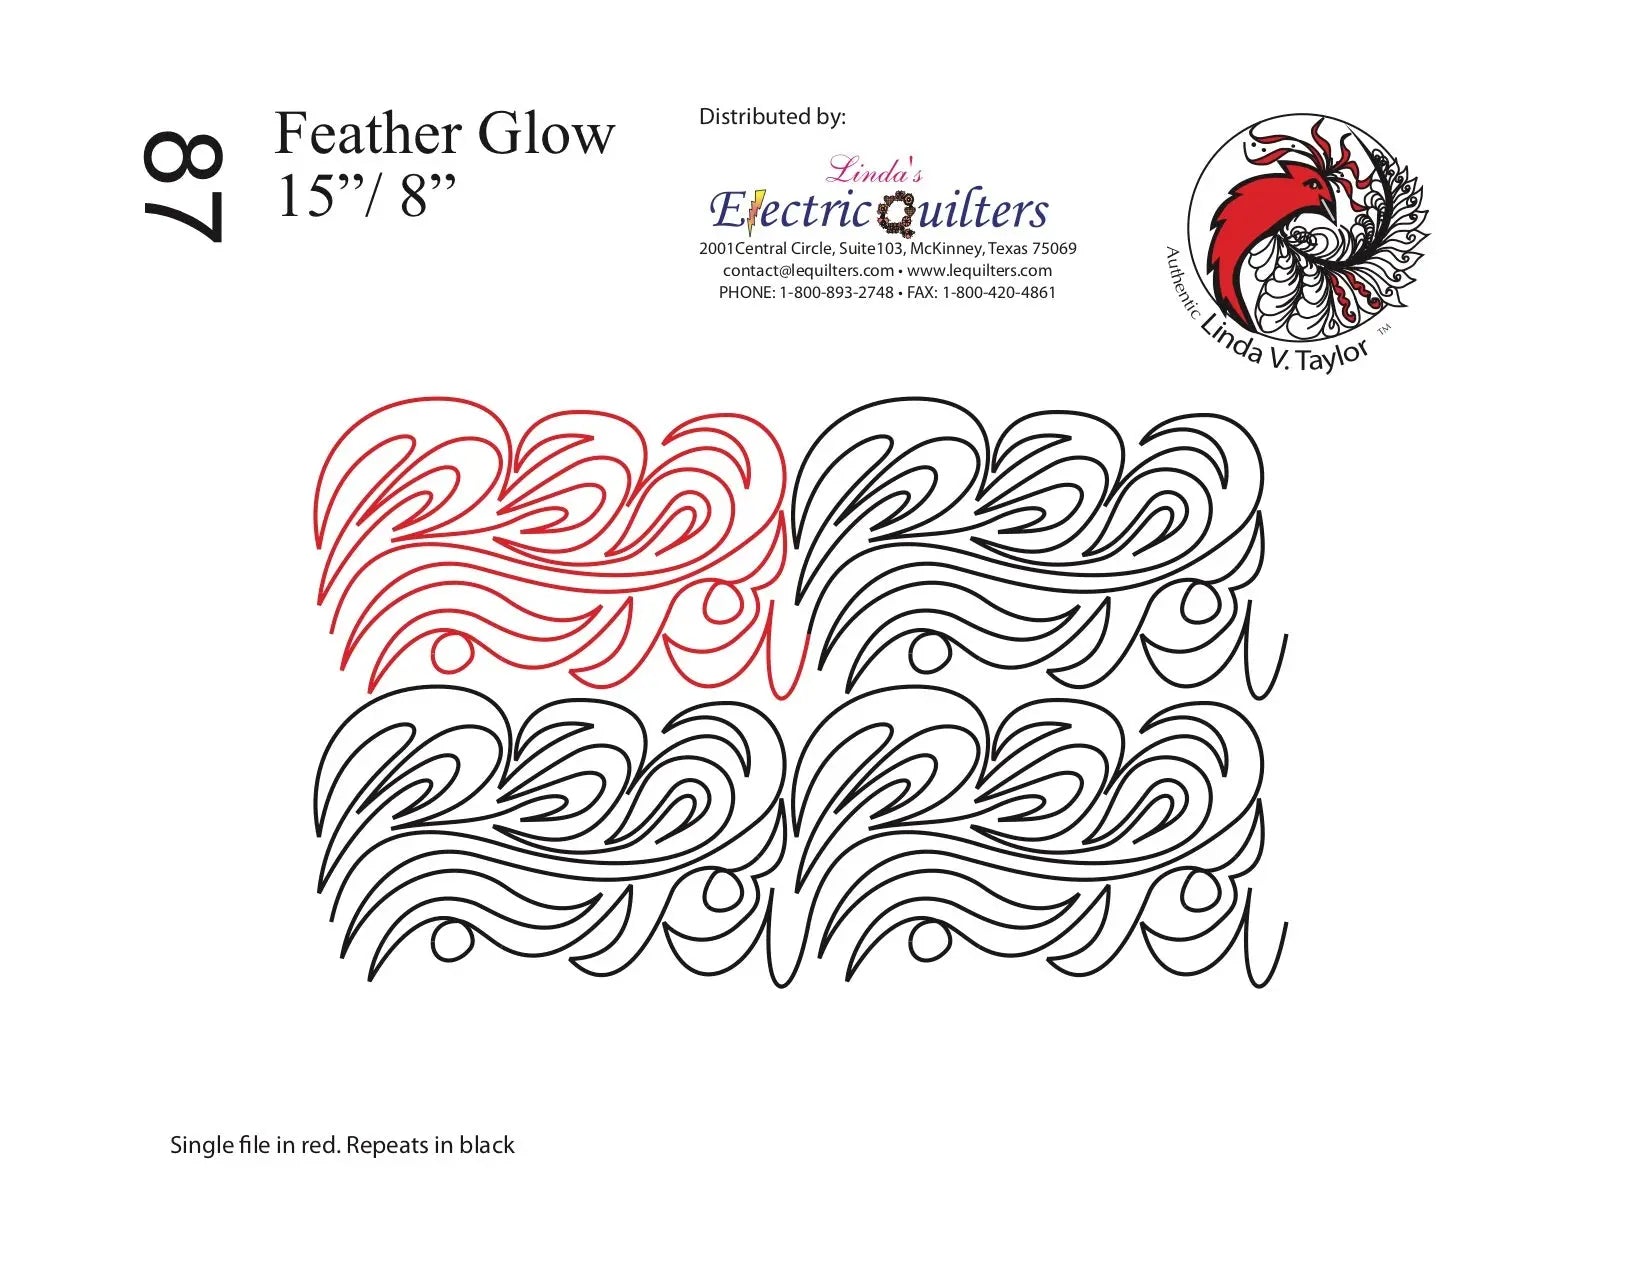 087 Feather Glow Pantograph by Linda V. Taylor - Linda's Electric Quilters